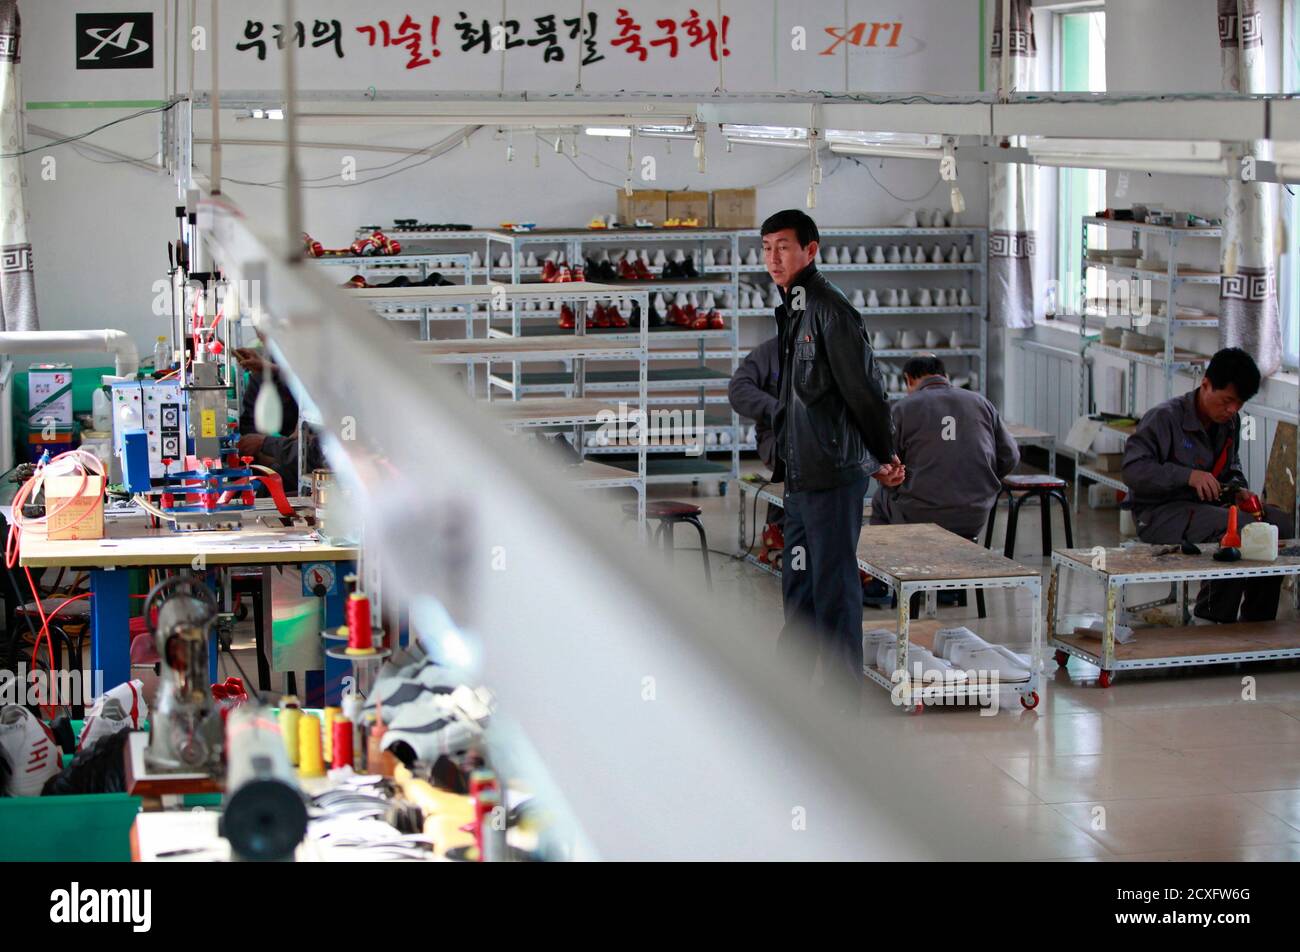 A North Korean manager stands supervising amidst North Korean workers at a  temporary soccer shoe factory in a rural village on the edge of Dandong  October 24, 2012. Top soccer-boot maker Adidas